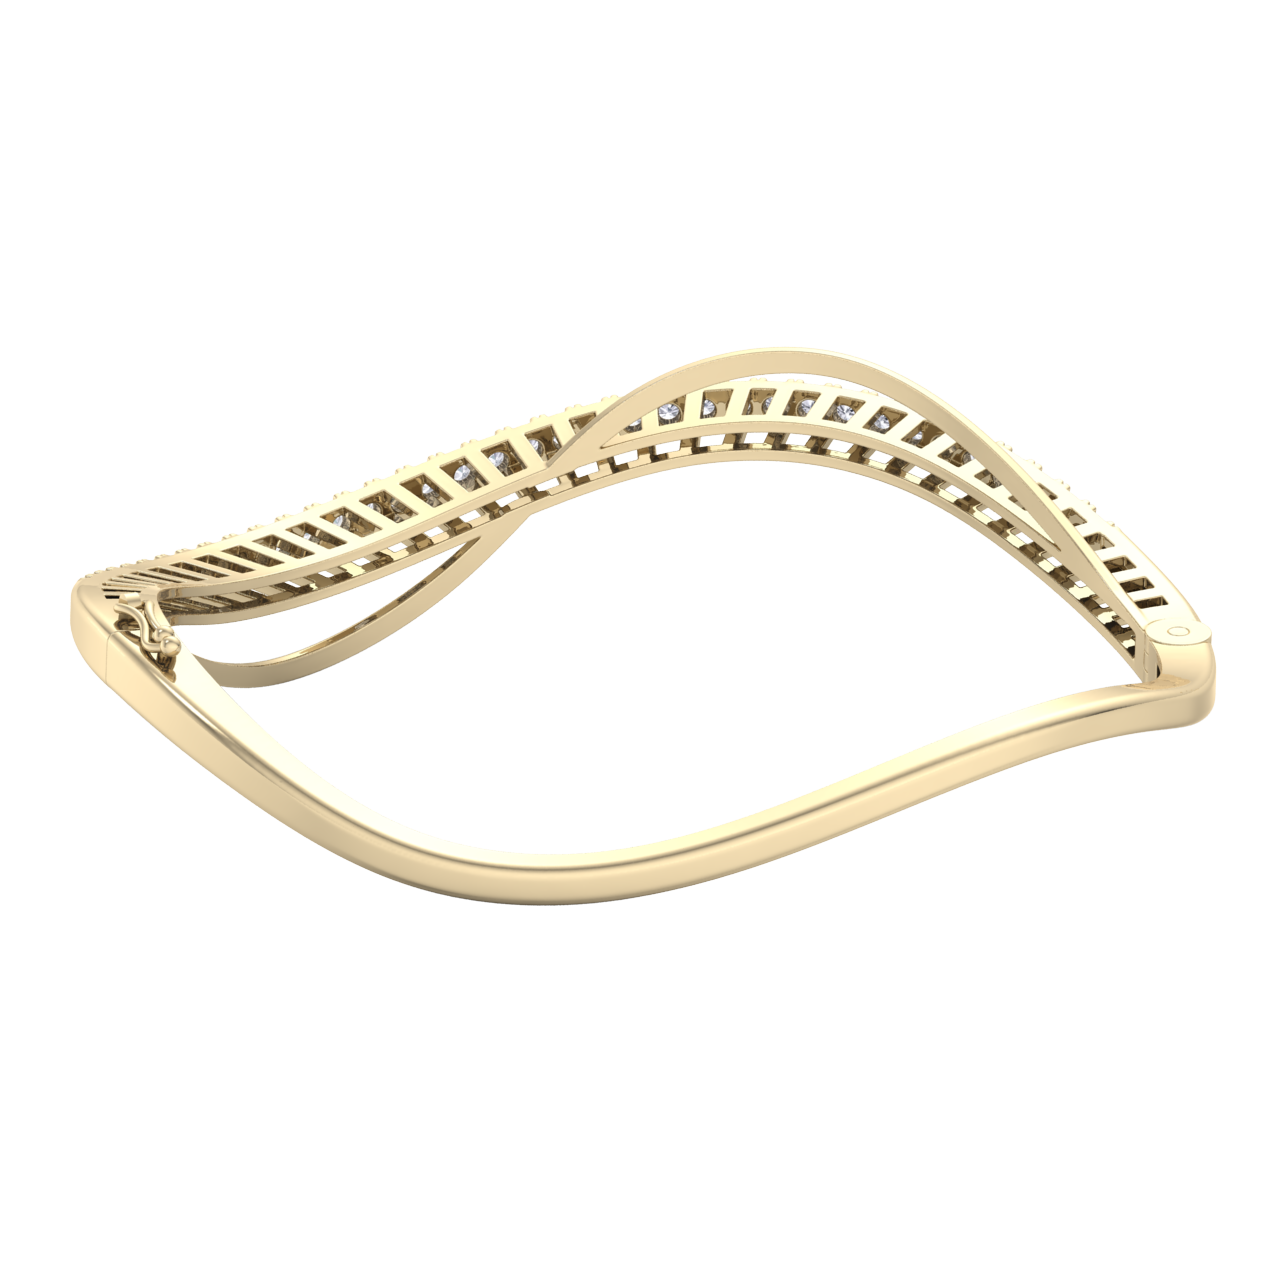 Stylish bracelet in yellow gold with white diamonds of 1.08 ct in weight